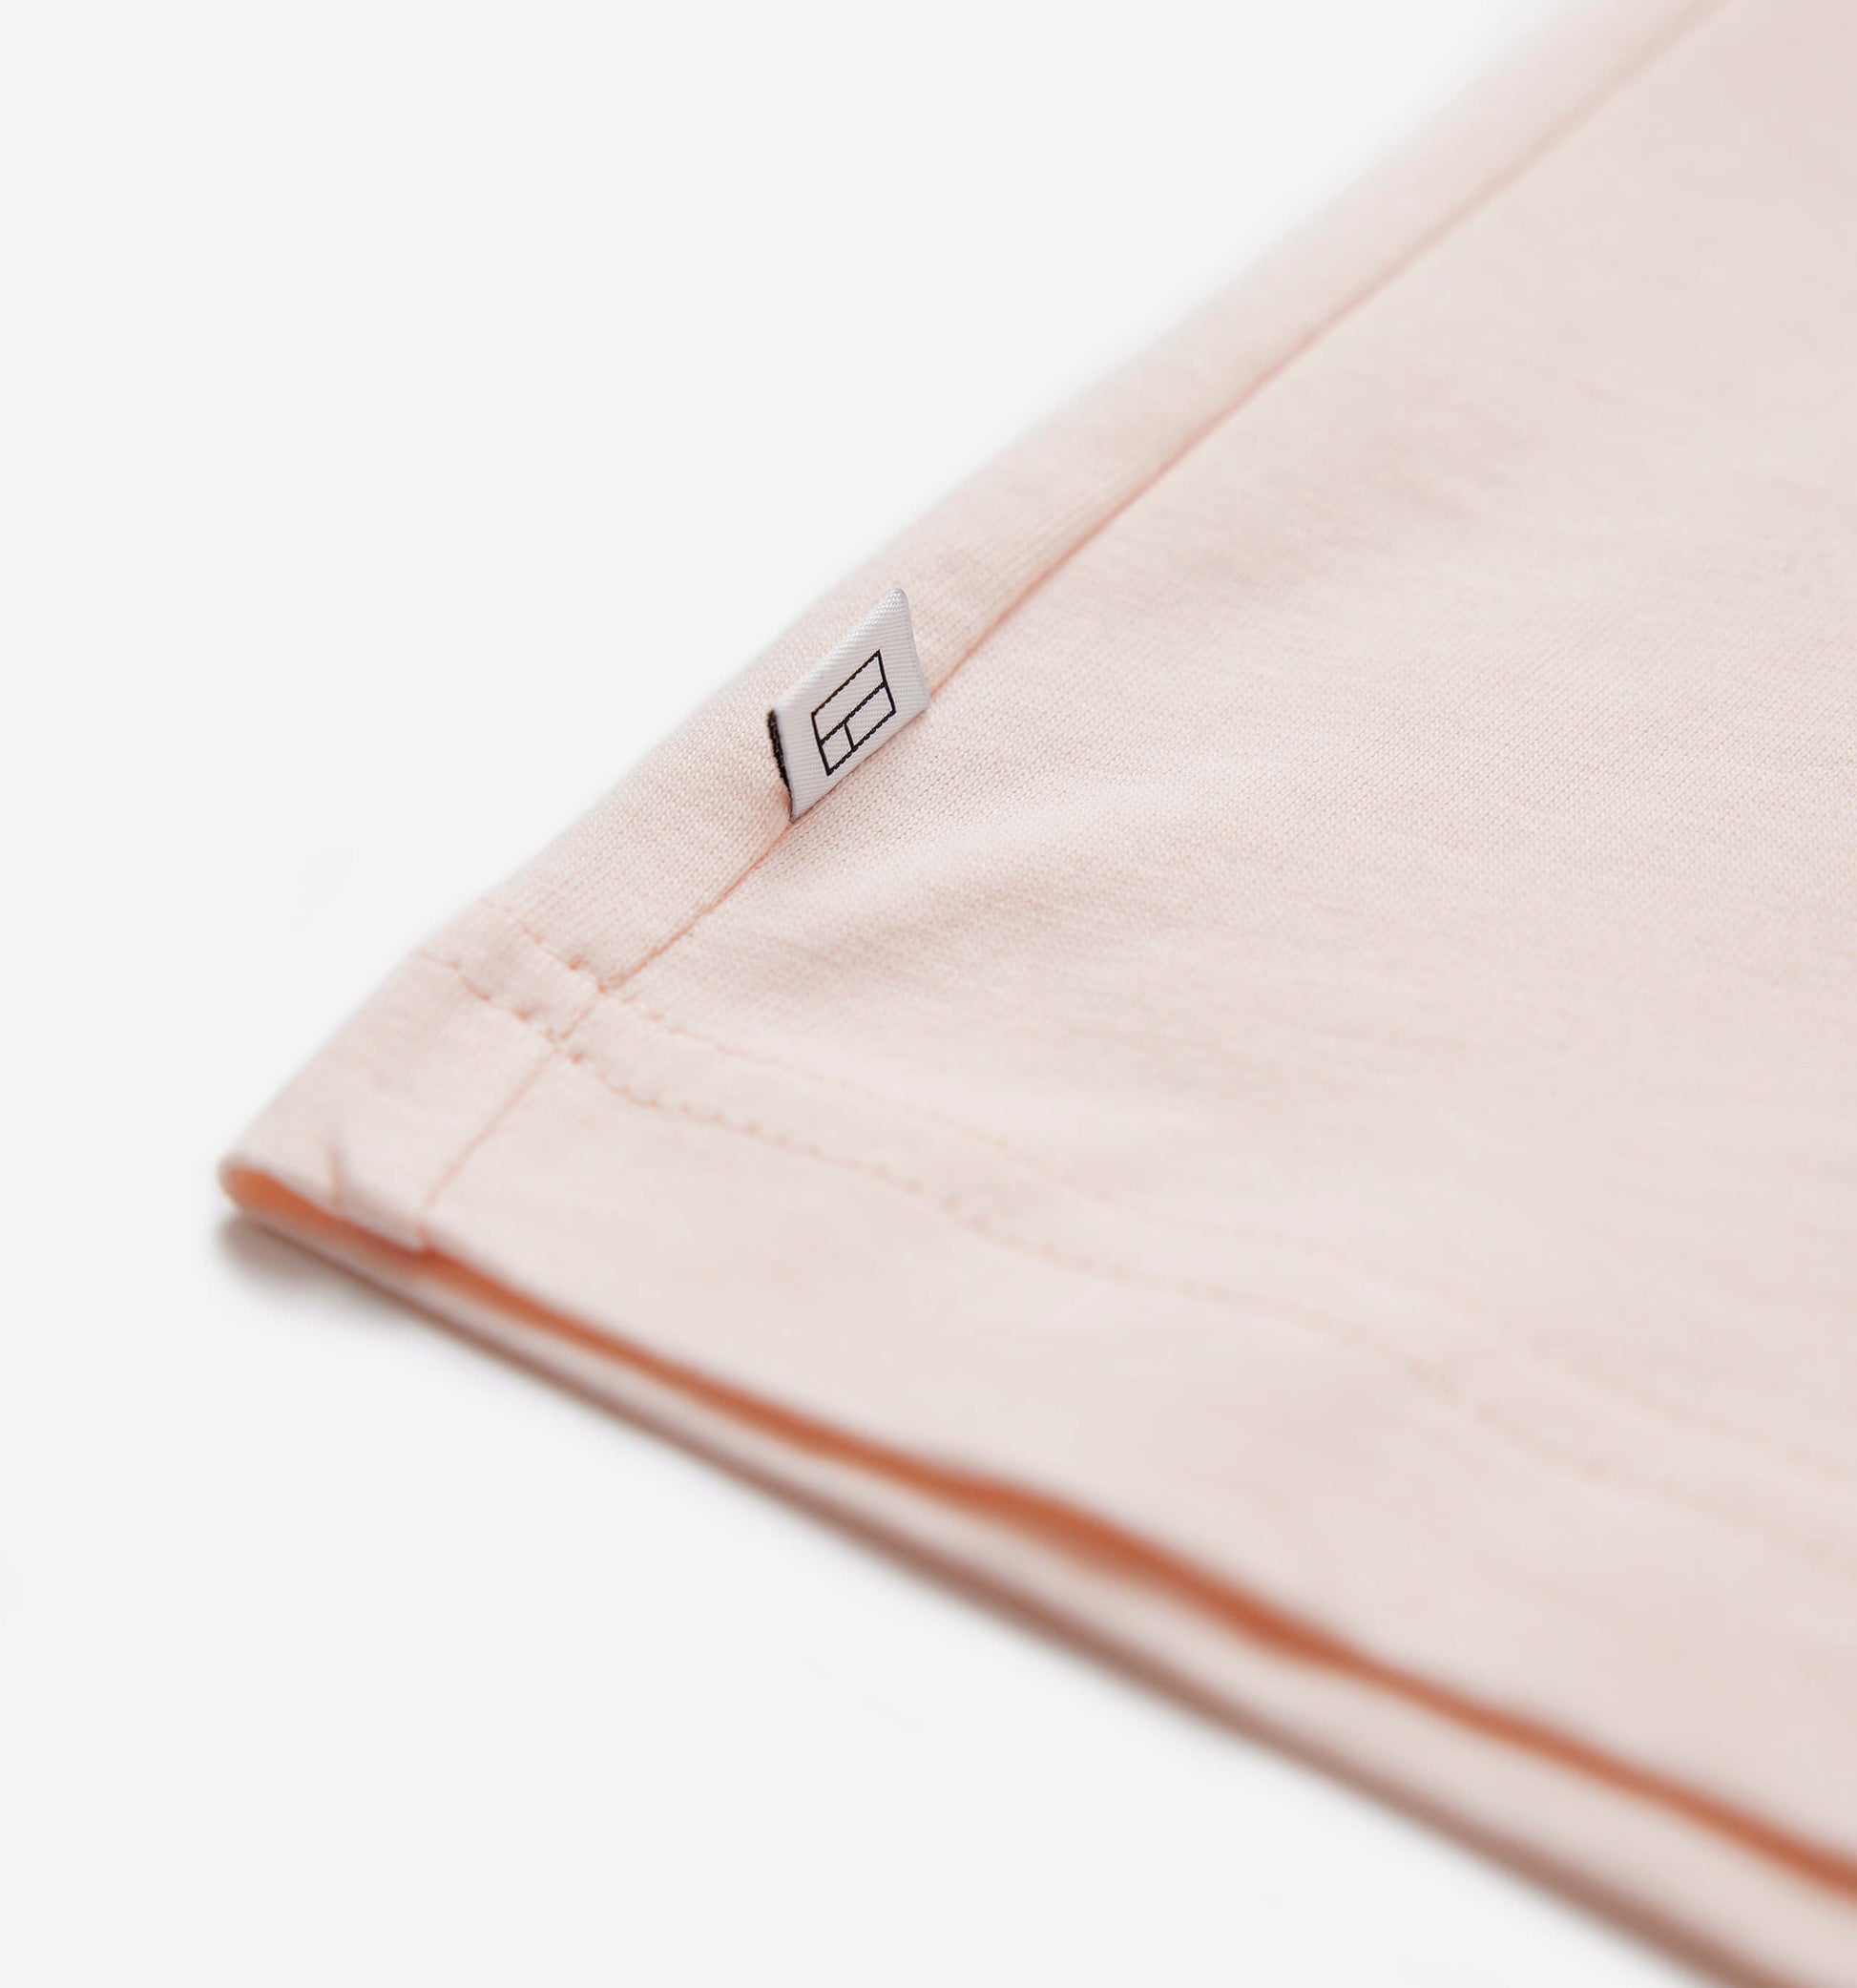 The Steve - Basic Cotton T-shirt In Pink From King Essentials